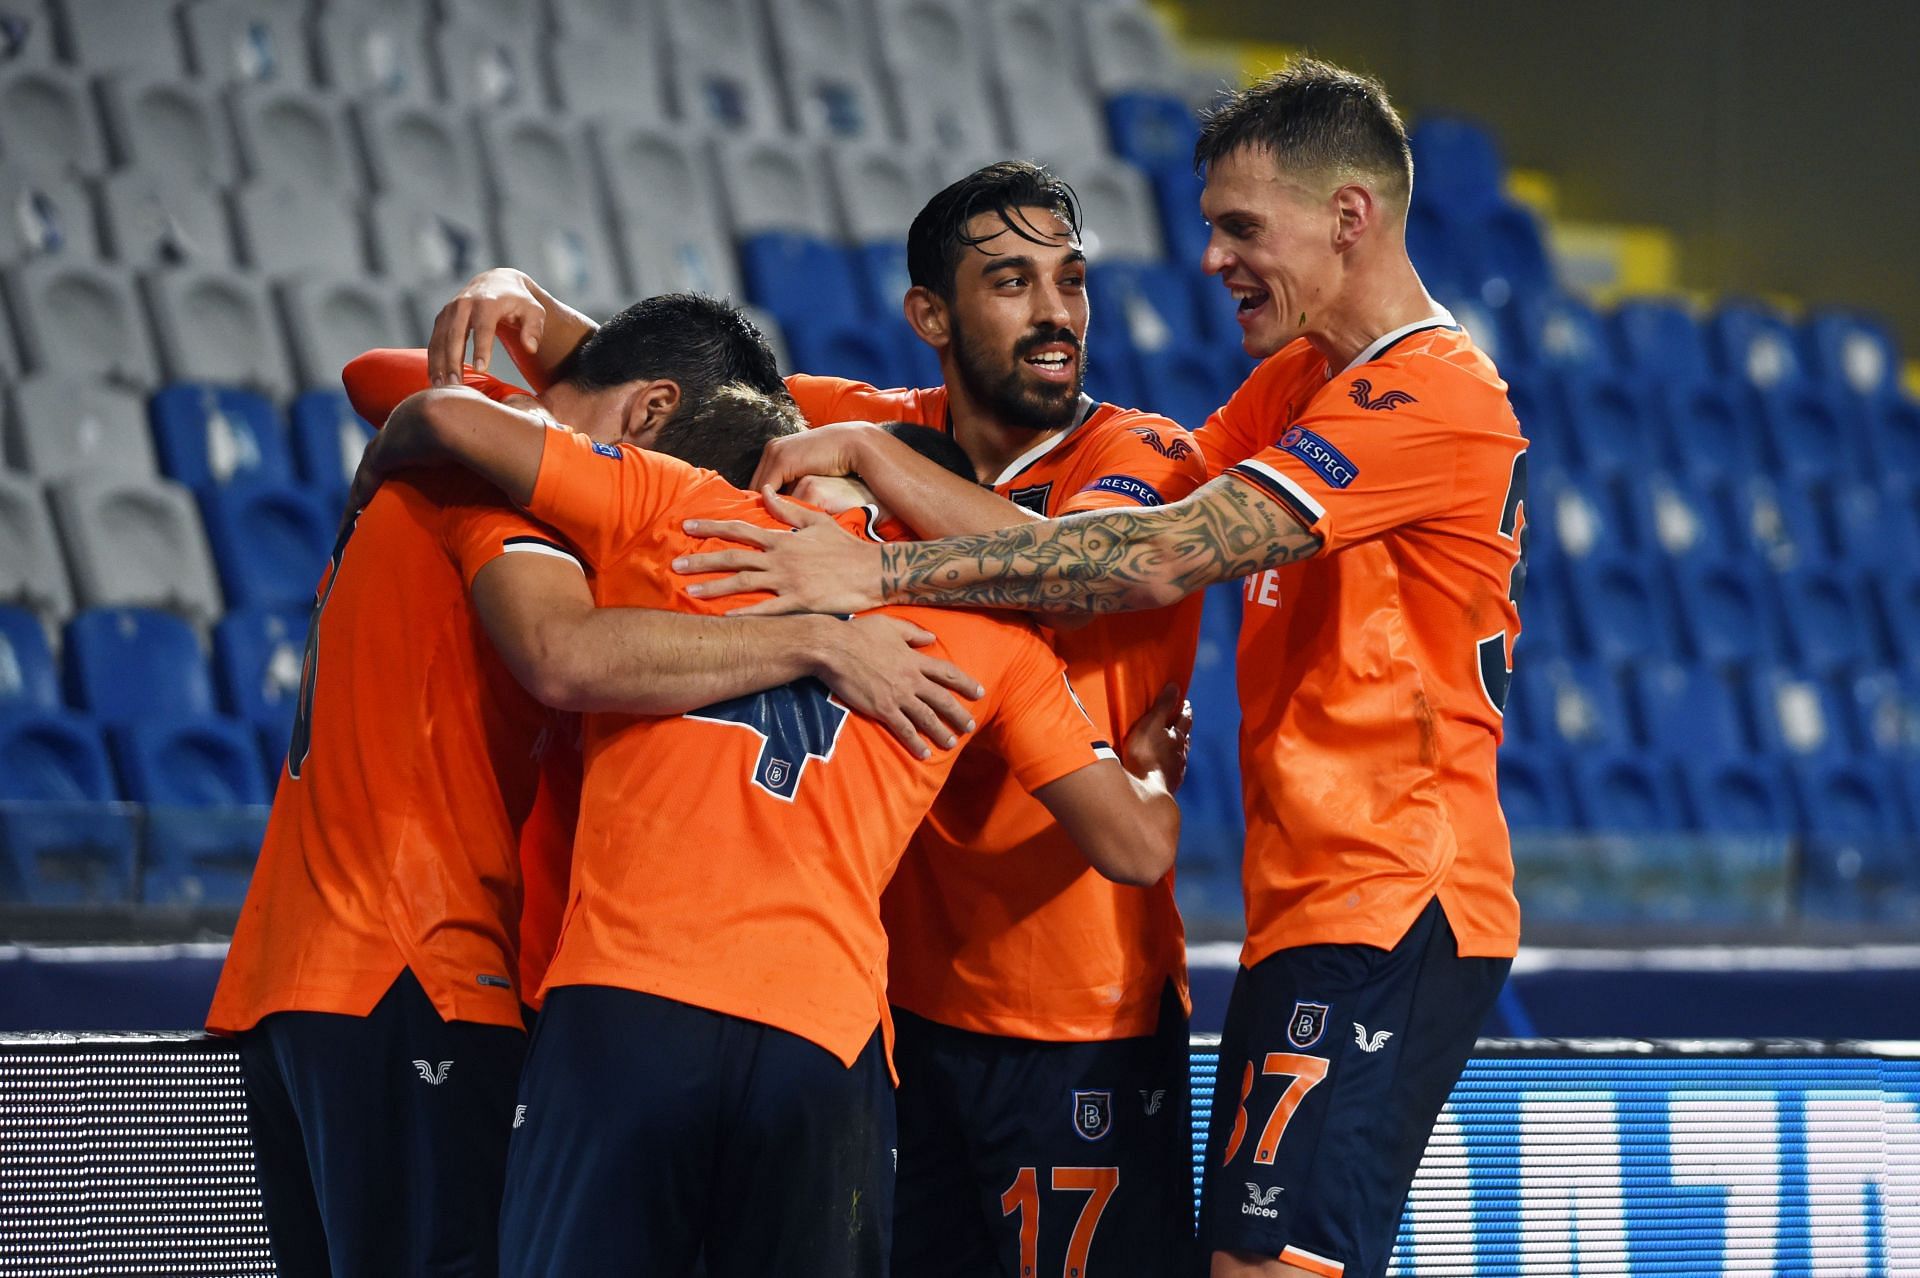 Istanbul Basaksehir look poised to reach the playoffs after winning the first leg 3-1.